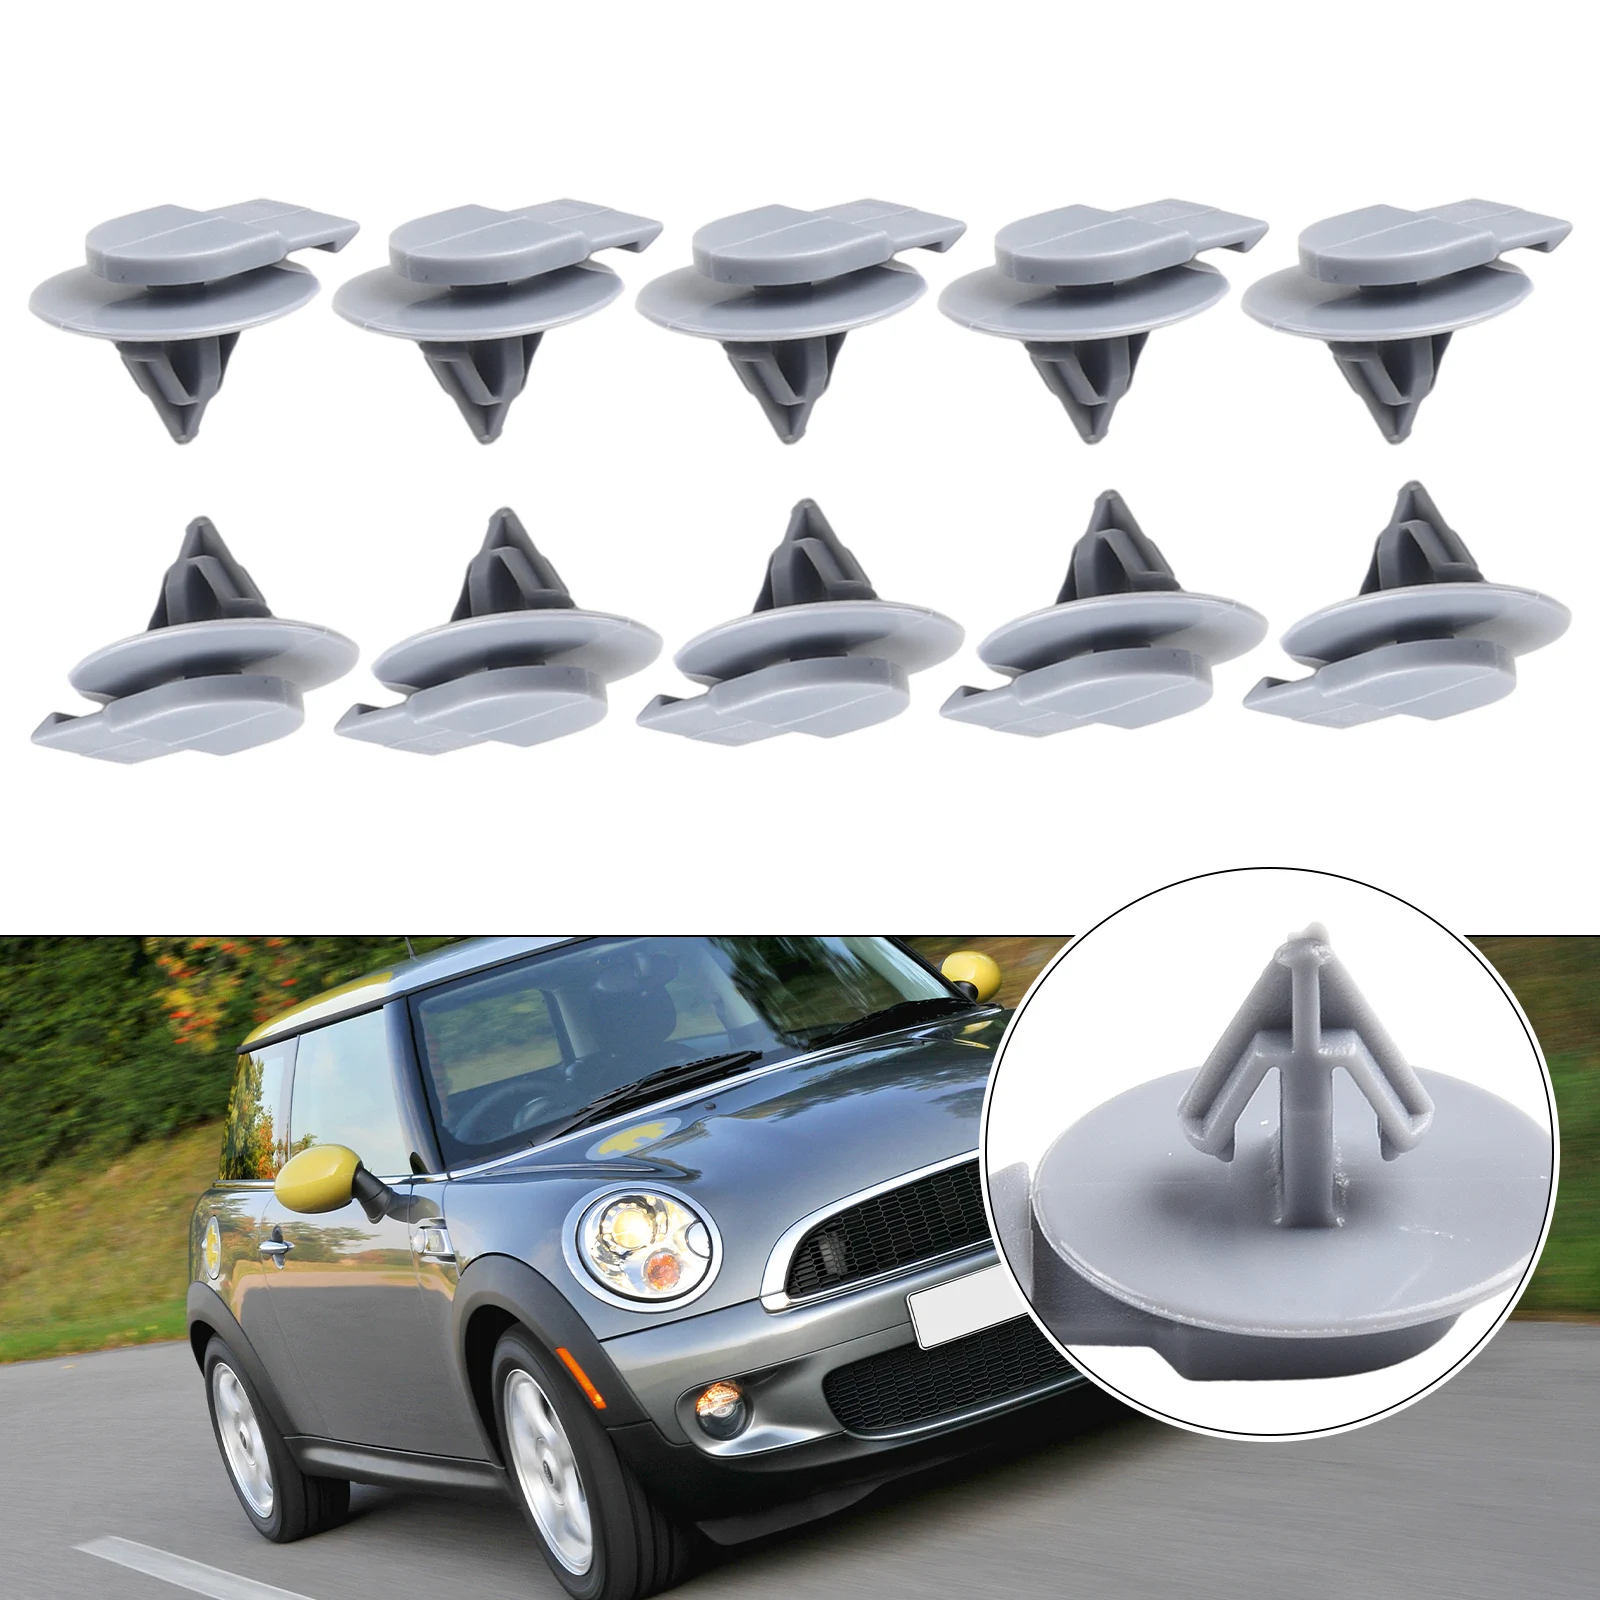 

Replace old or damaged clips with these Wheel Arch Trim Molding Clips for BMW For Mini For Cooper R50 R52 R55 R56 Set of 10